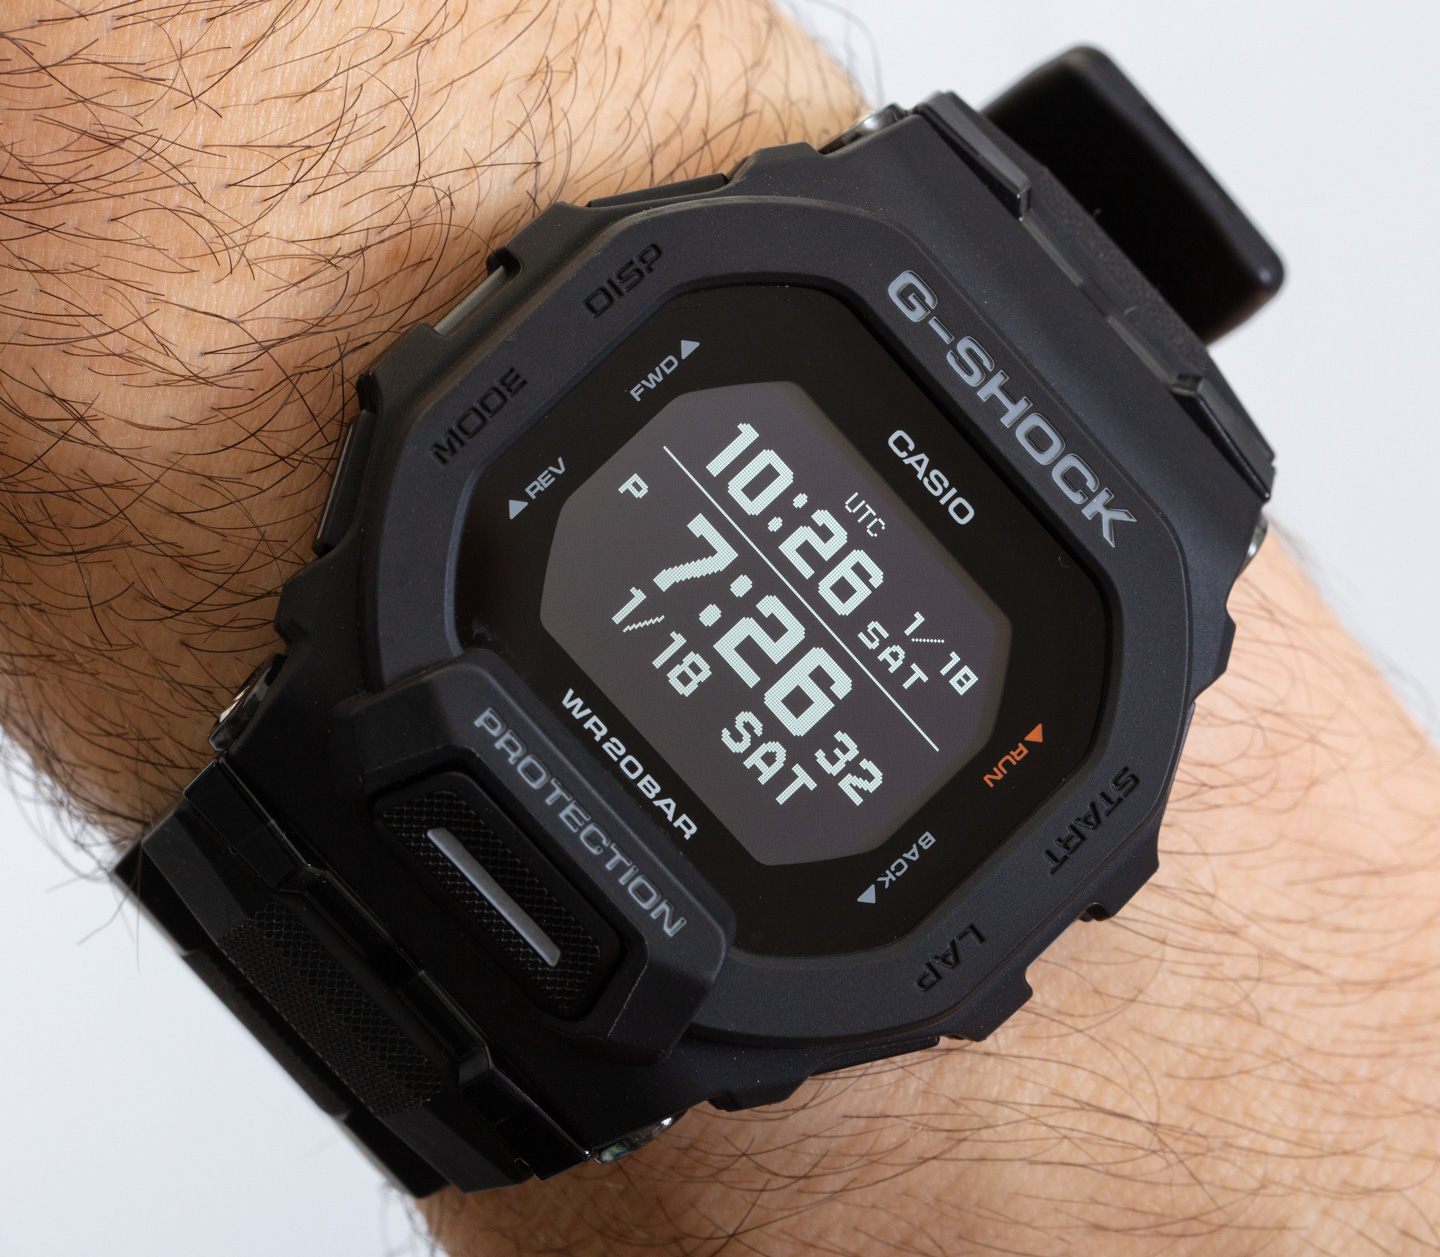 Watch Review: Casio GBD200 Entry-Level Bluetooth MiP G-Shock